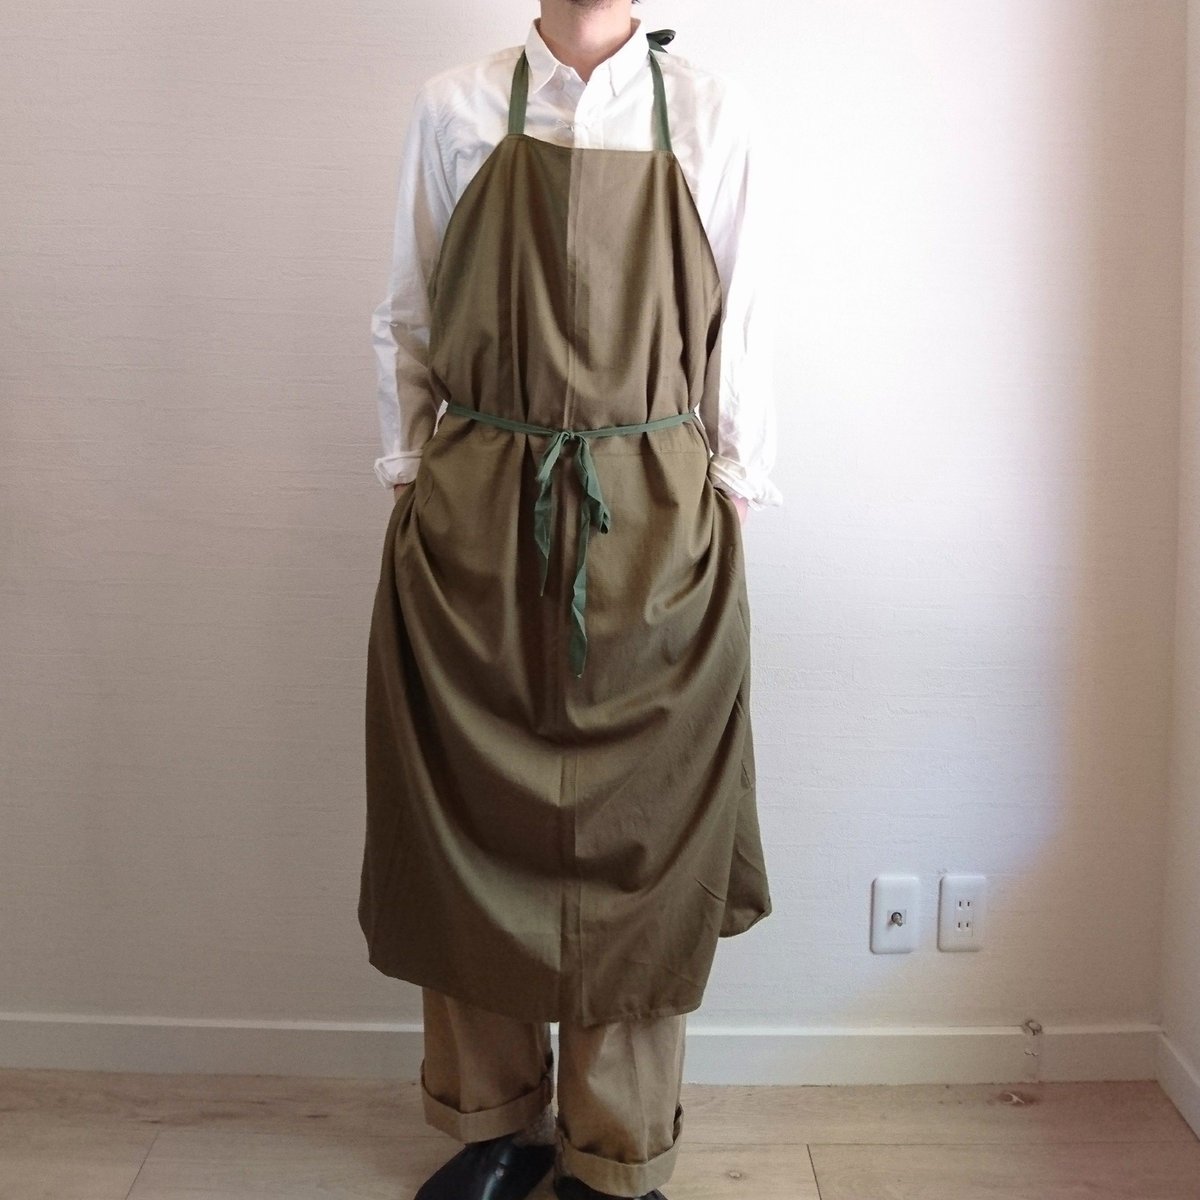 Czech Army Vintage Apron DeadStock】チェコ軍 ヴィンテージ...